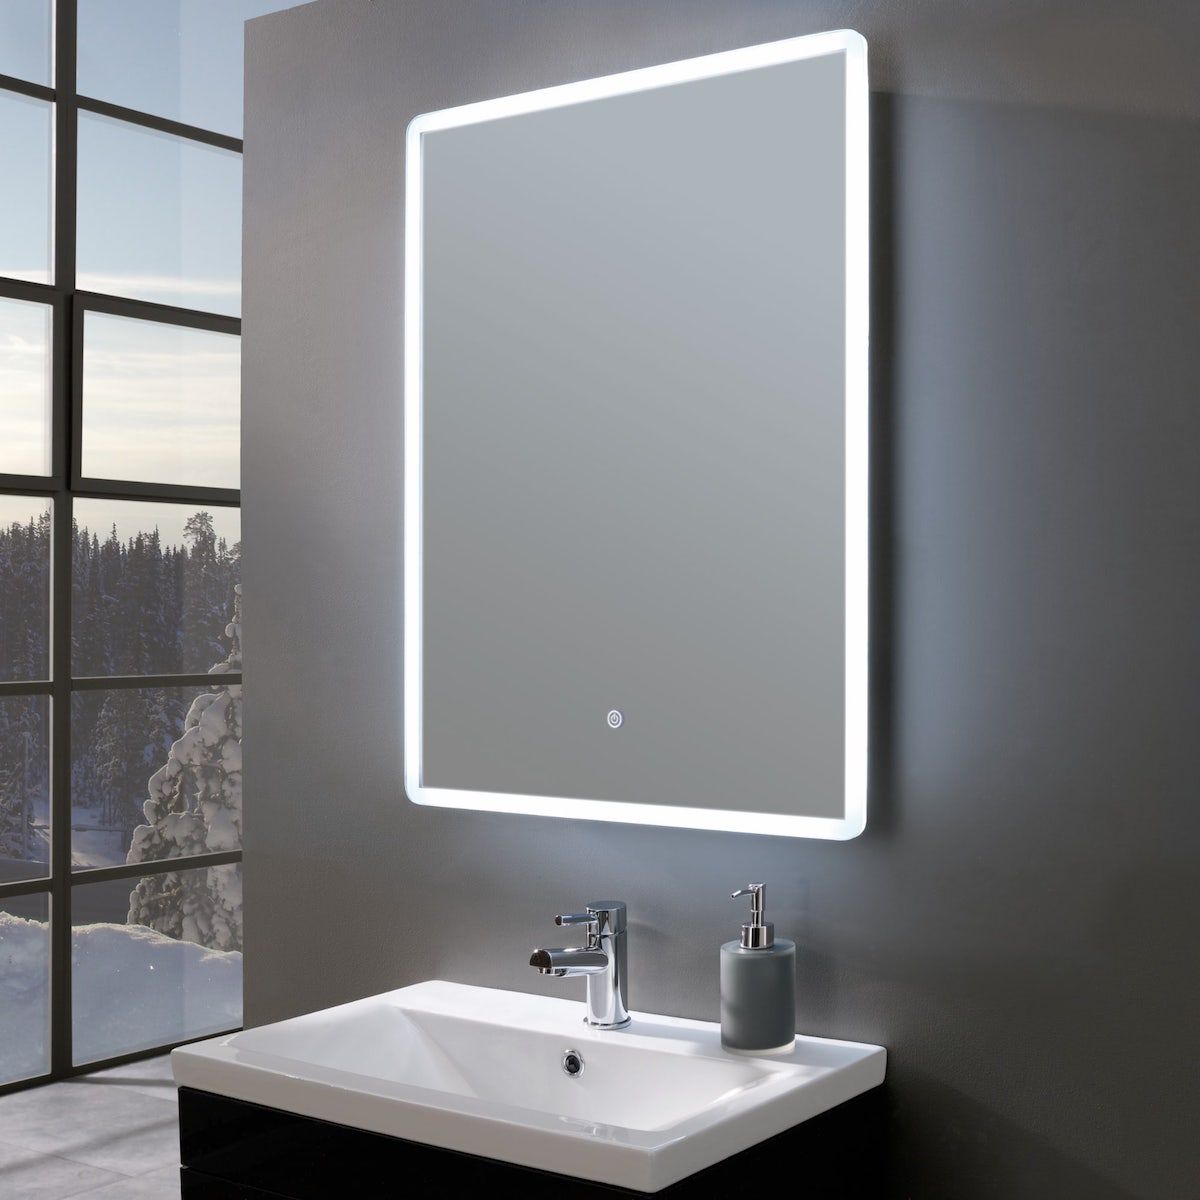 Demister Pad and 3x Magnifier Wall Mounted Multifunction LED Bathroom Vanity Mirror with Touch Switch Vertical EMKE Backlit Illuminated Bathroom Mirror with Shaver Socket 500x700mm